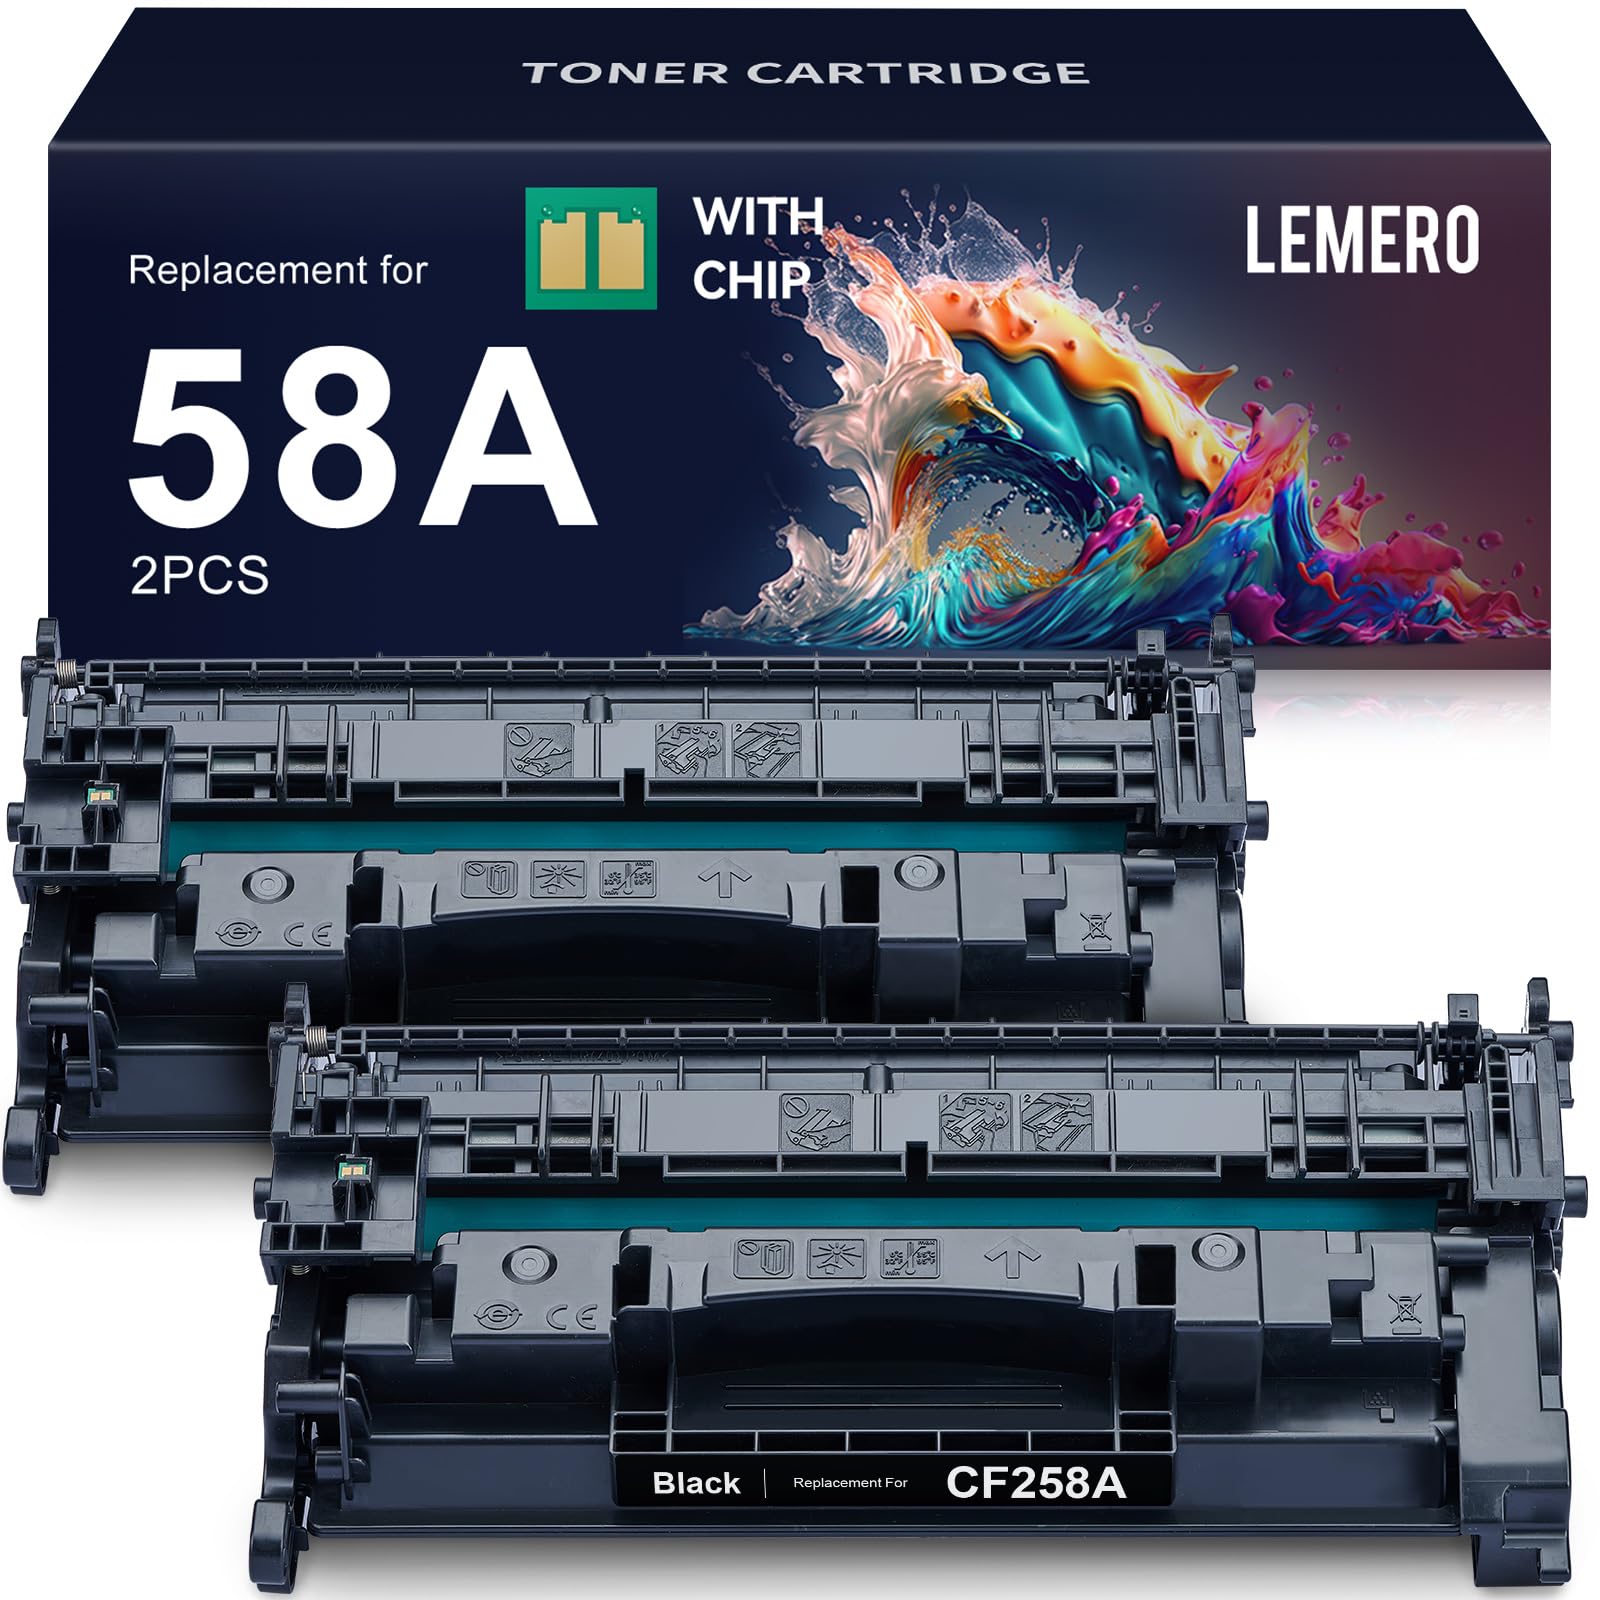 LEMERO 58A toner cartridges with chip, replacement for CF258A, 2 pieces